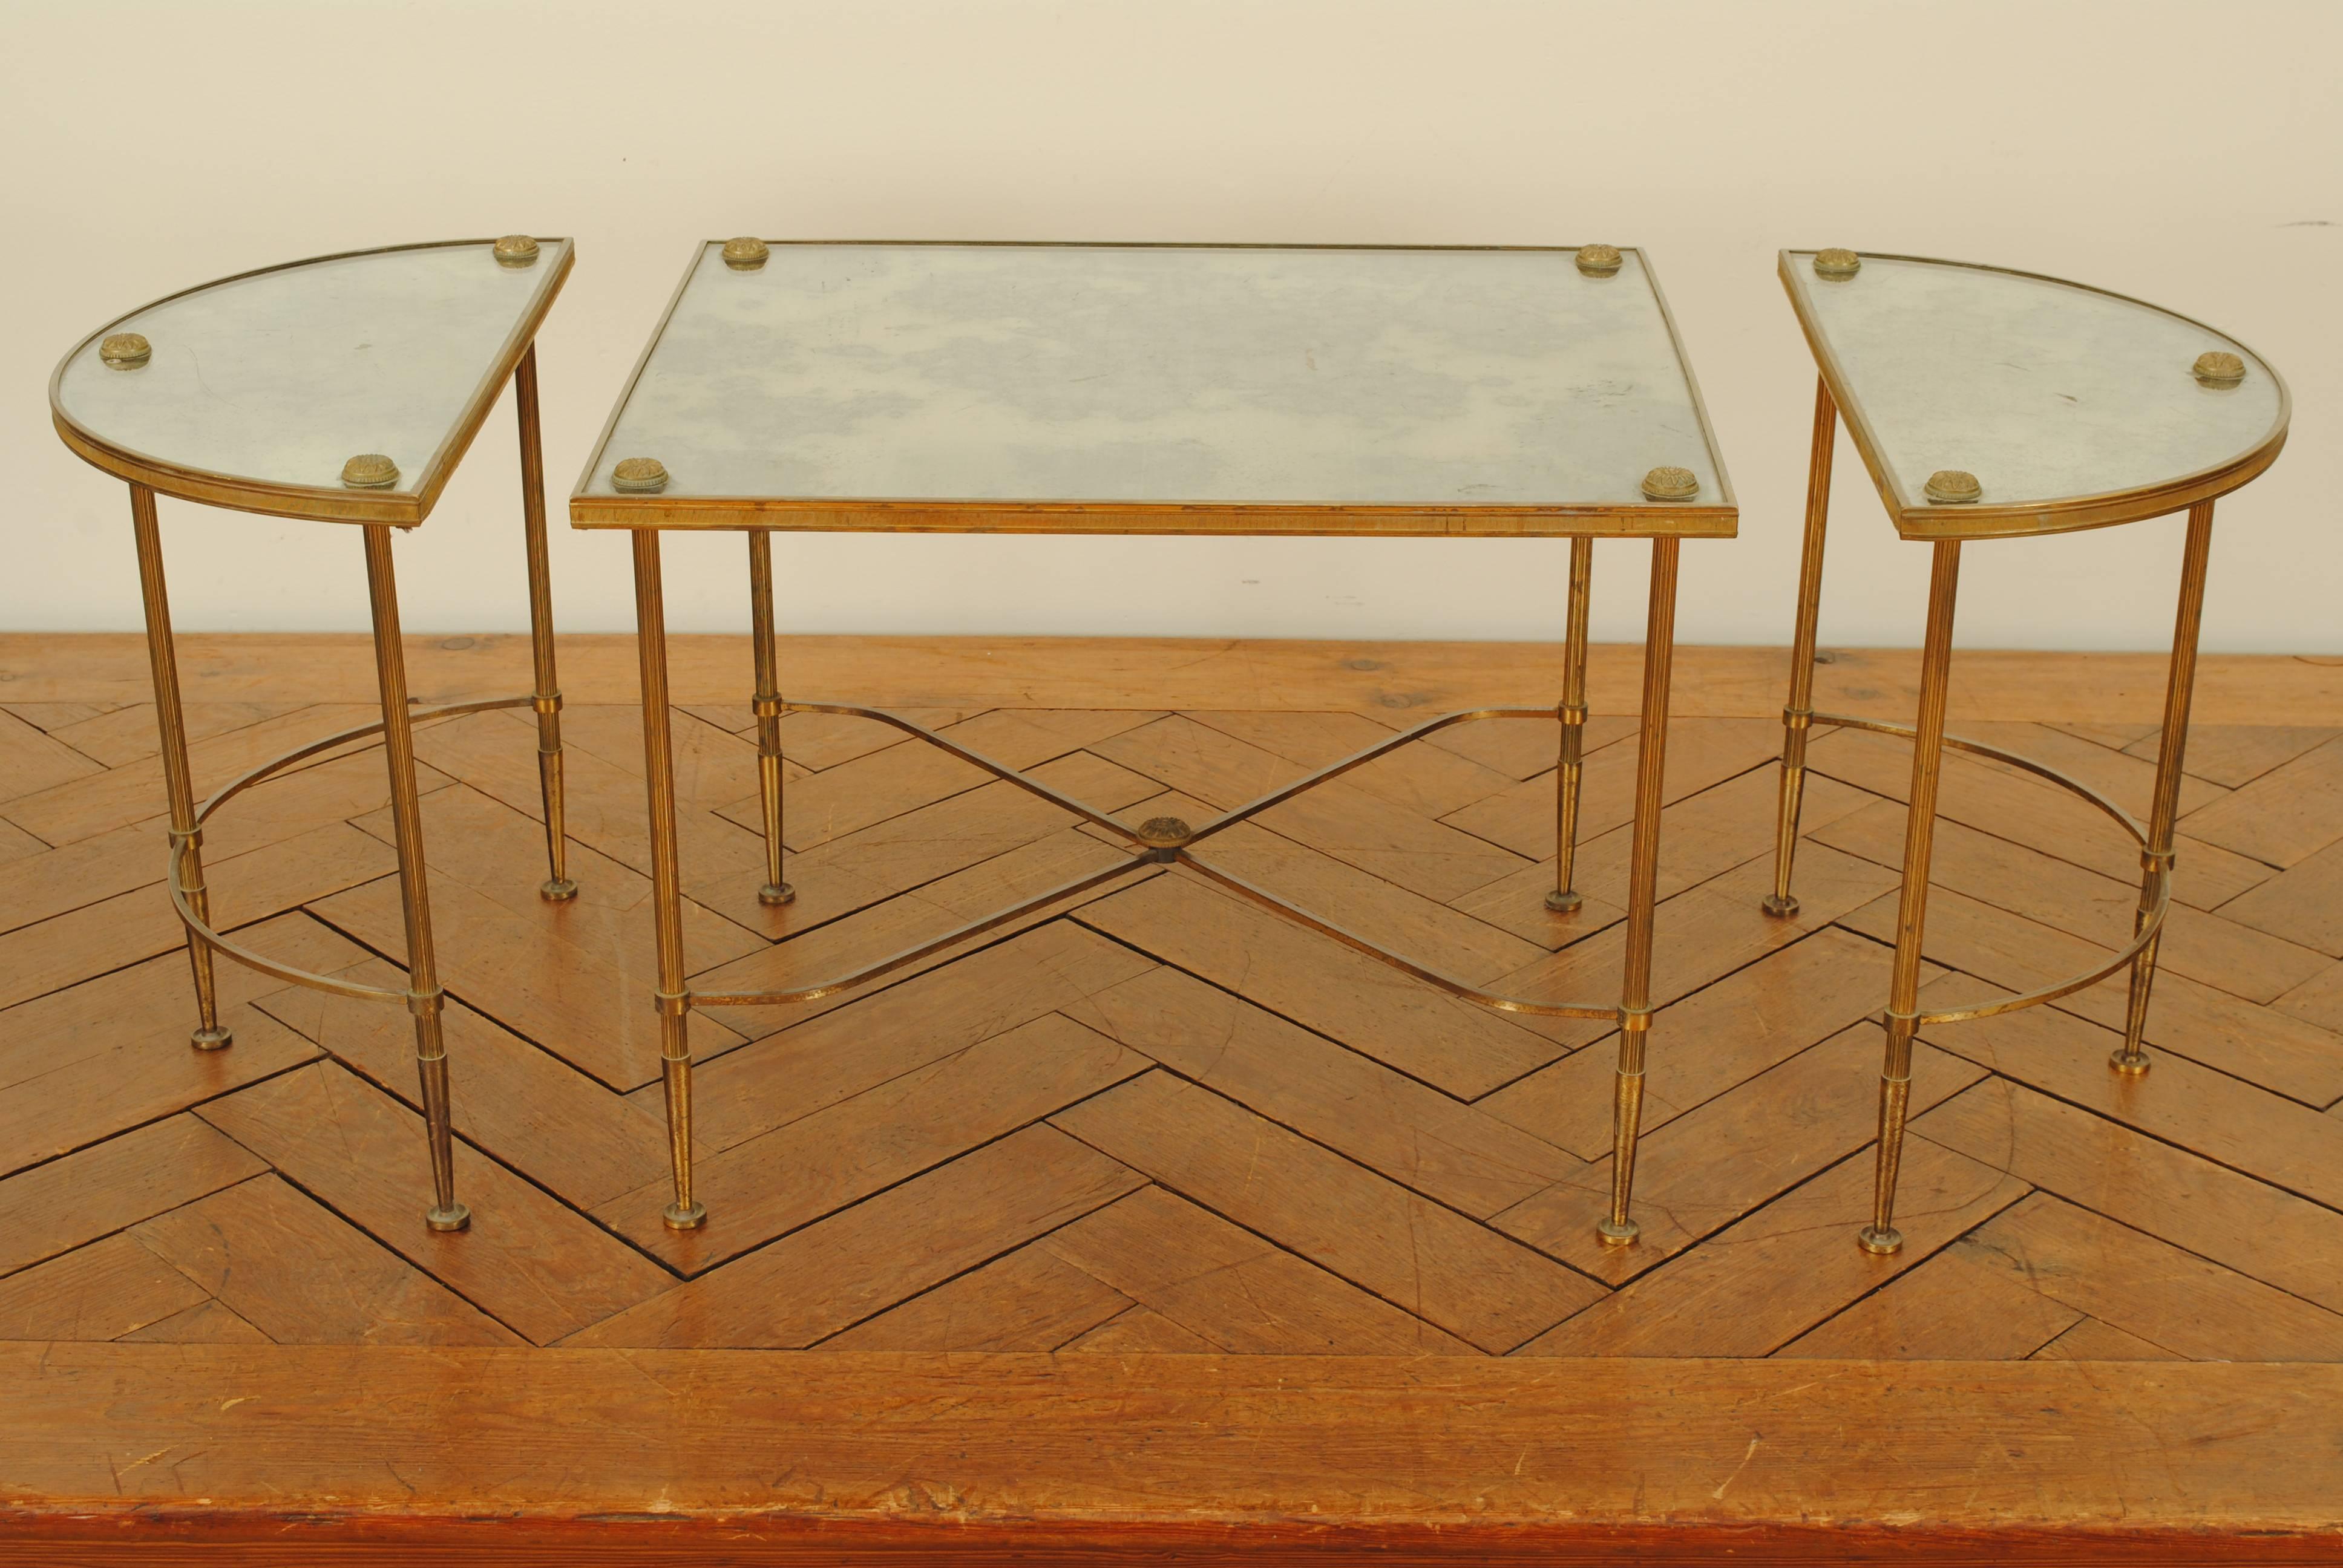 Three independent tables, two of demilune form, the center section rectangular, all with mirrored tops, all sections with raised brass corner rosettes, the straight legs tapering at the feet and joined by curved and X-form stretchers, mid-20th